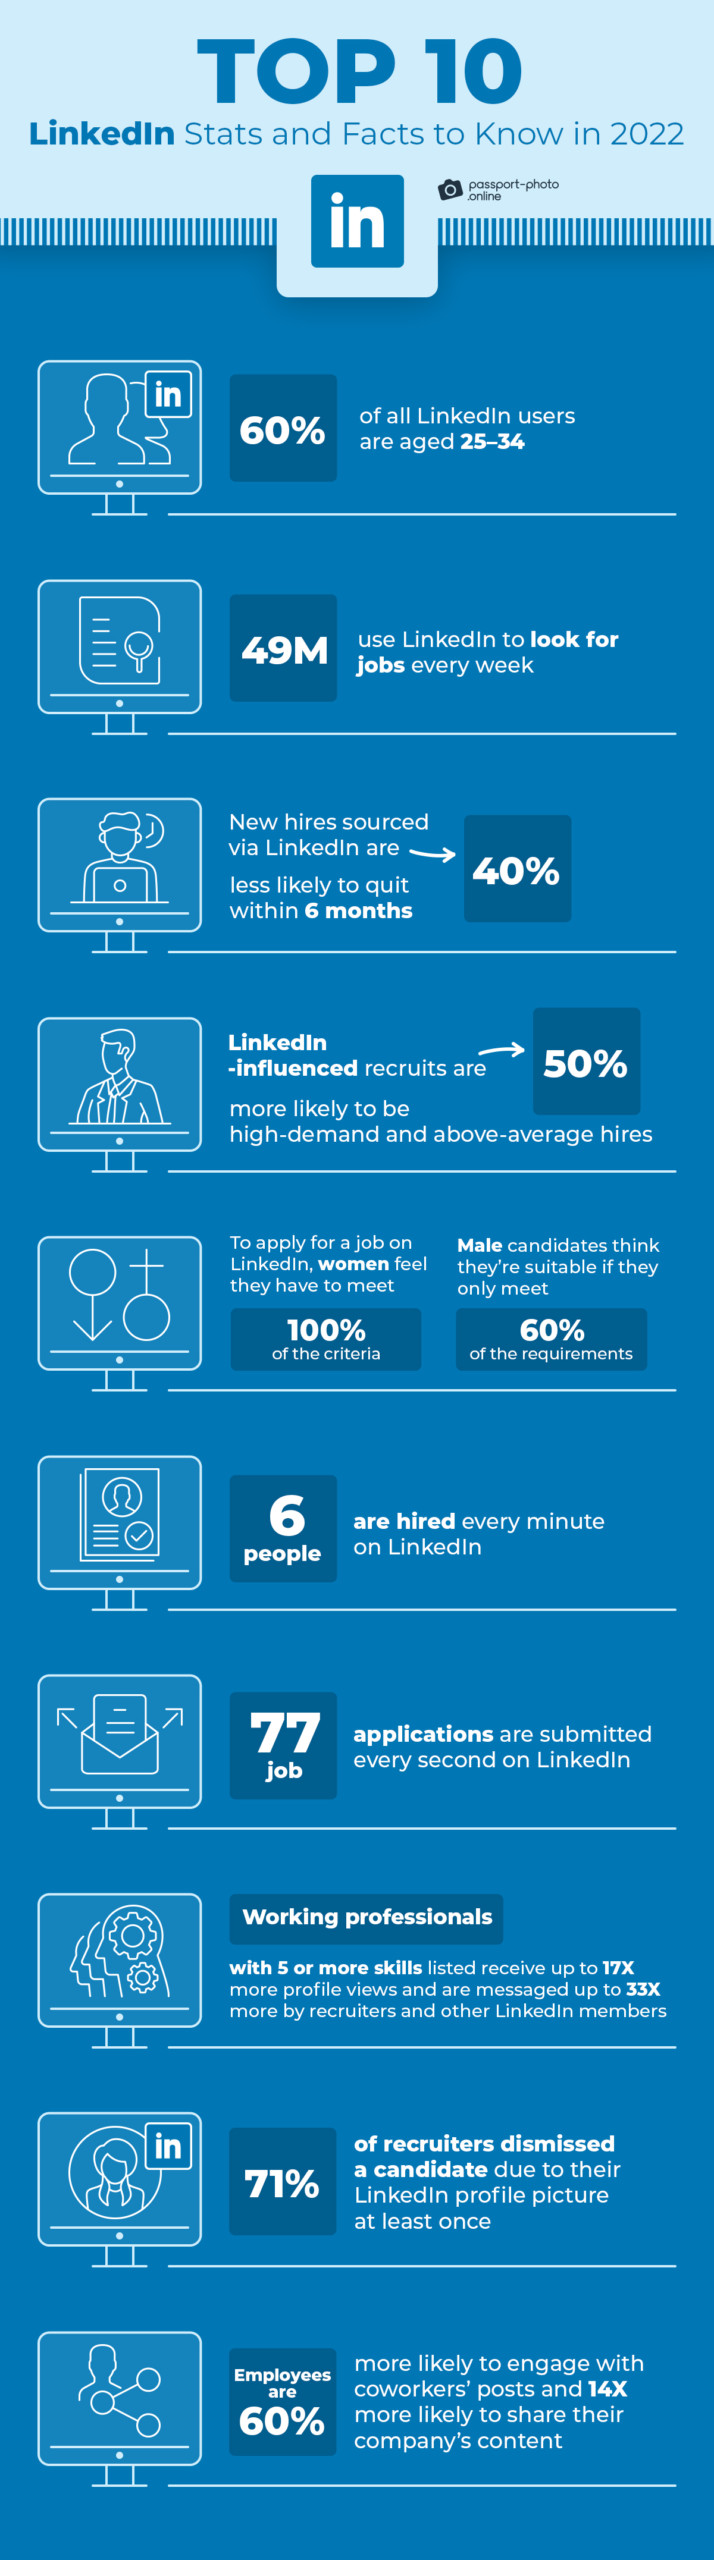 top 10 LinkedIn statistics and facts to know in 2022